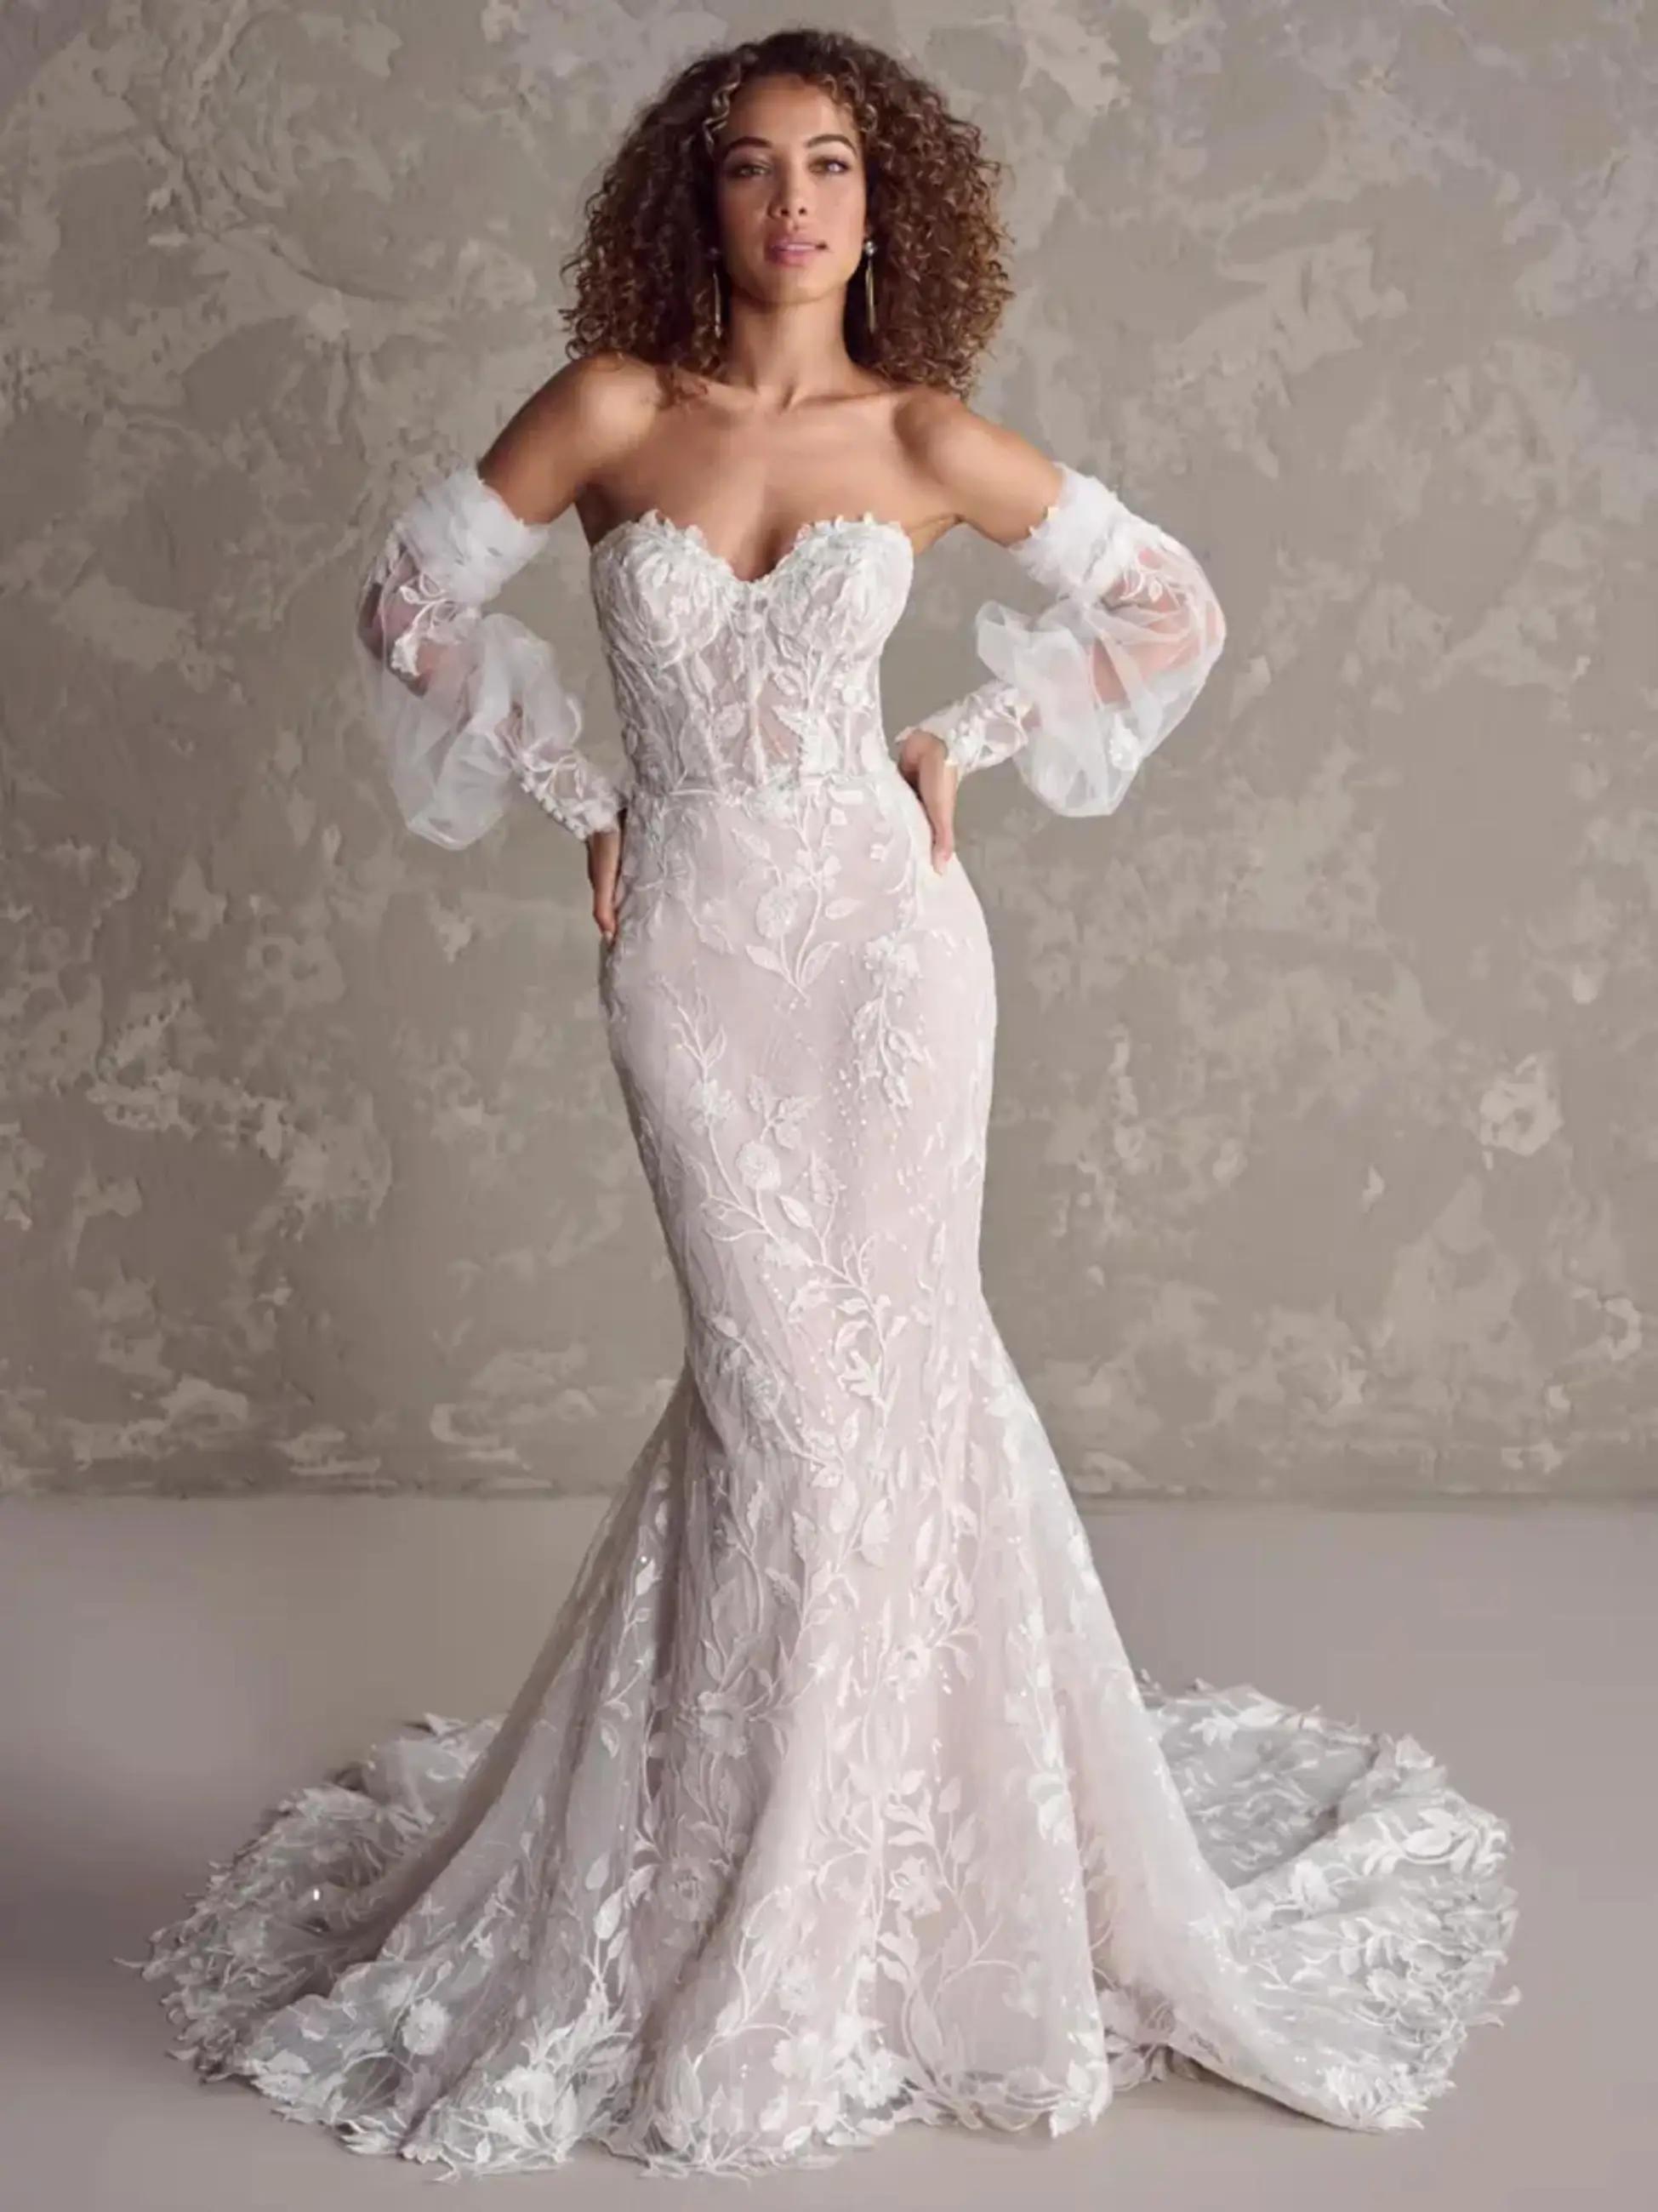 Expert Tips for Choosing Flattering Plus Size Bridal Gowns Image